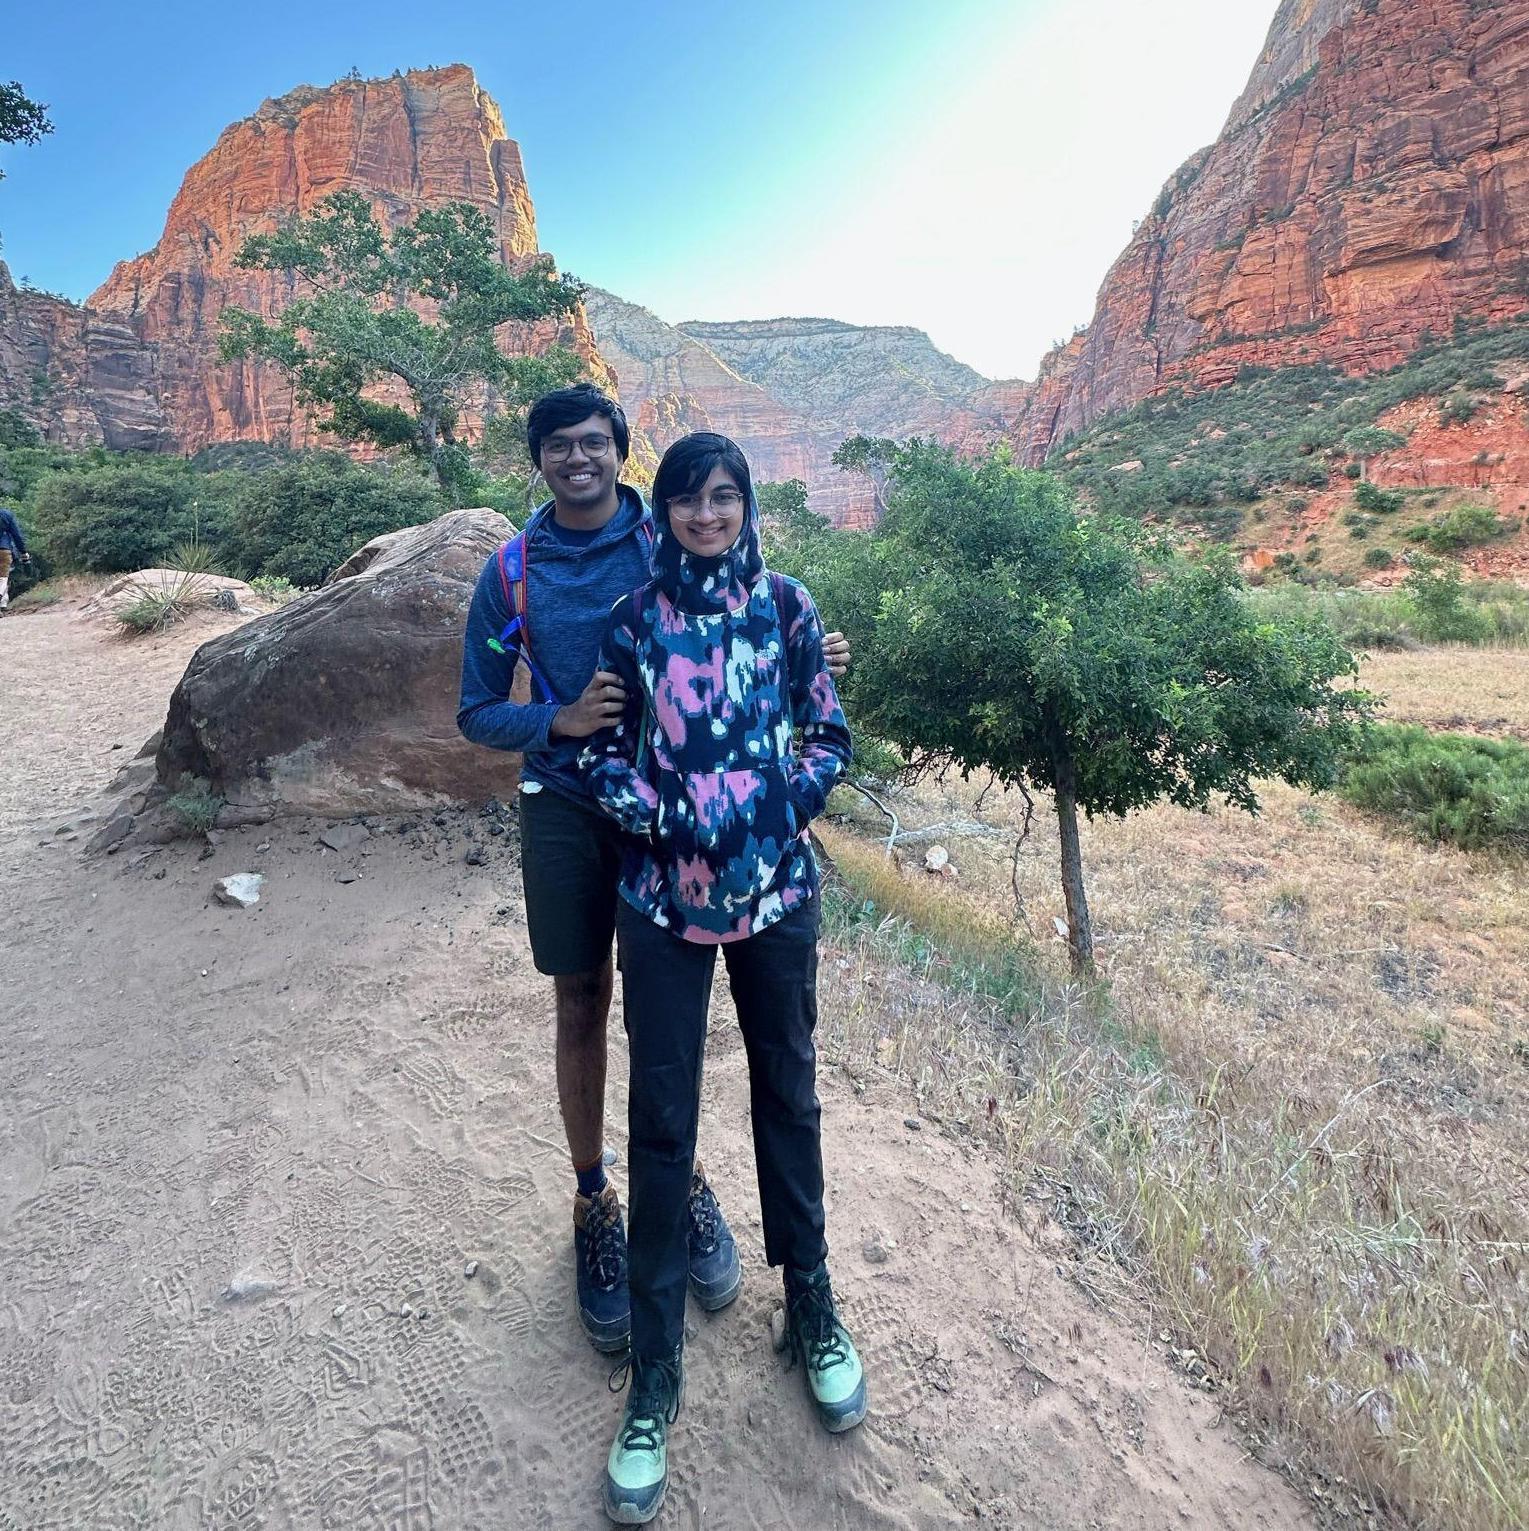 Raghav and I in our favorite place in the world!!! Zion National Park.